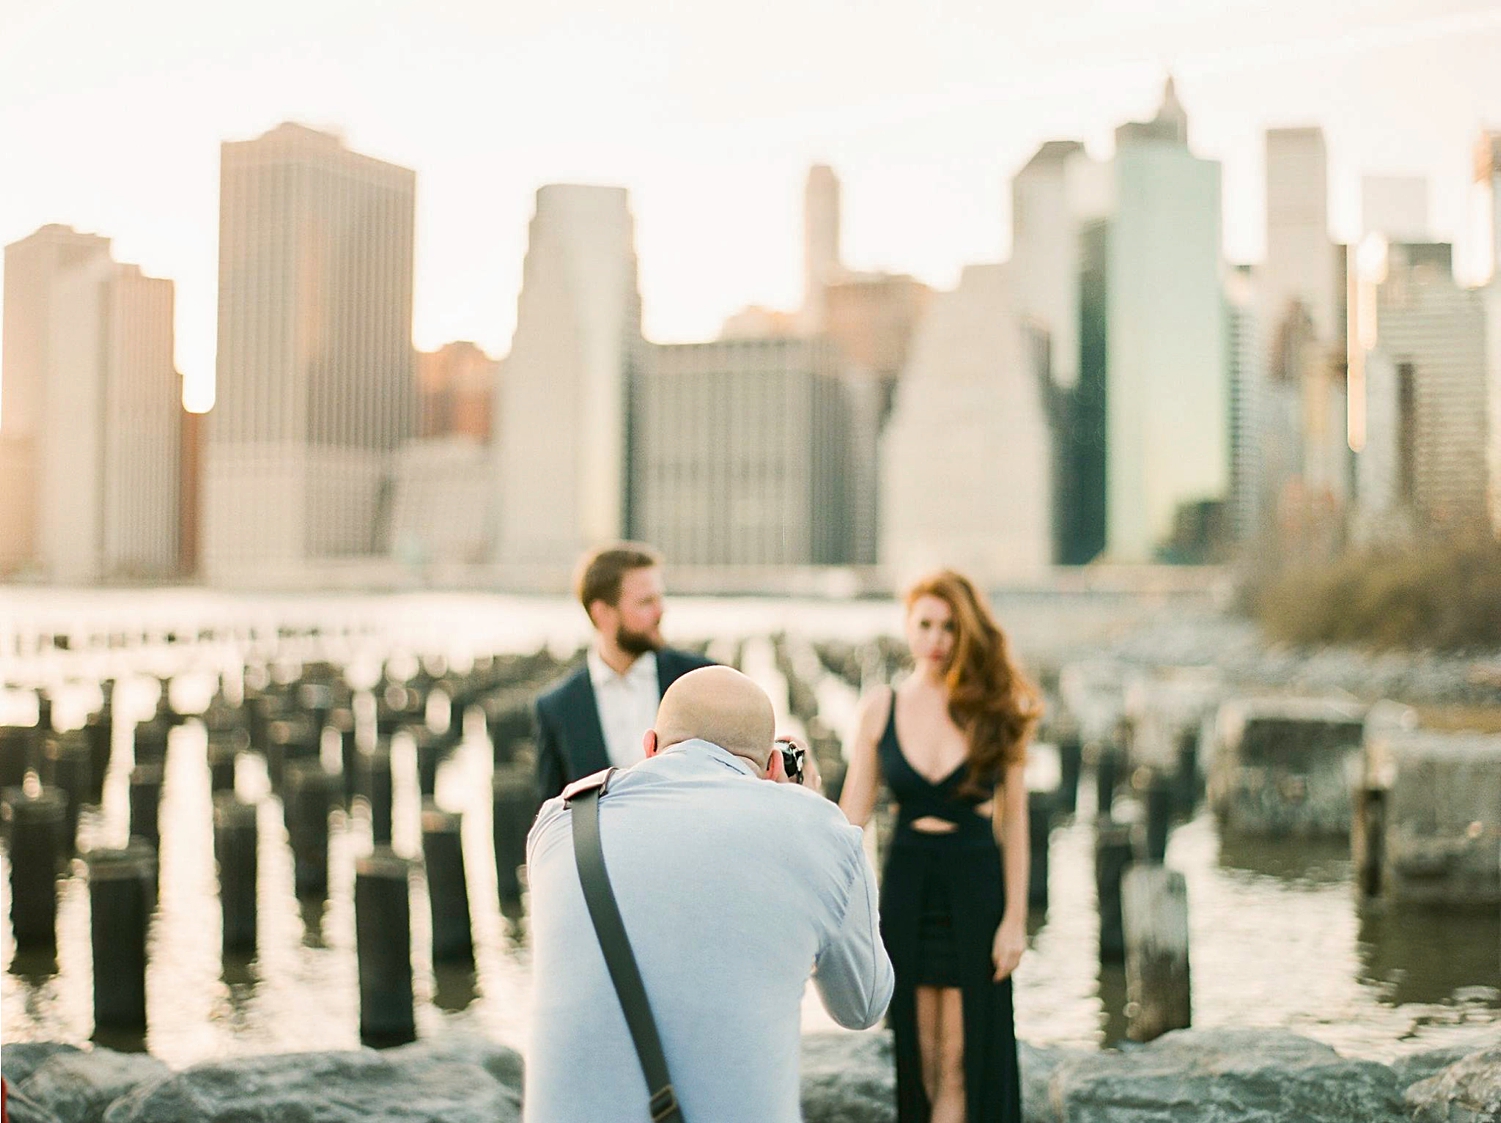 Photographer Jeff taking photo of couple in front of downtown manhattan skyline